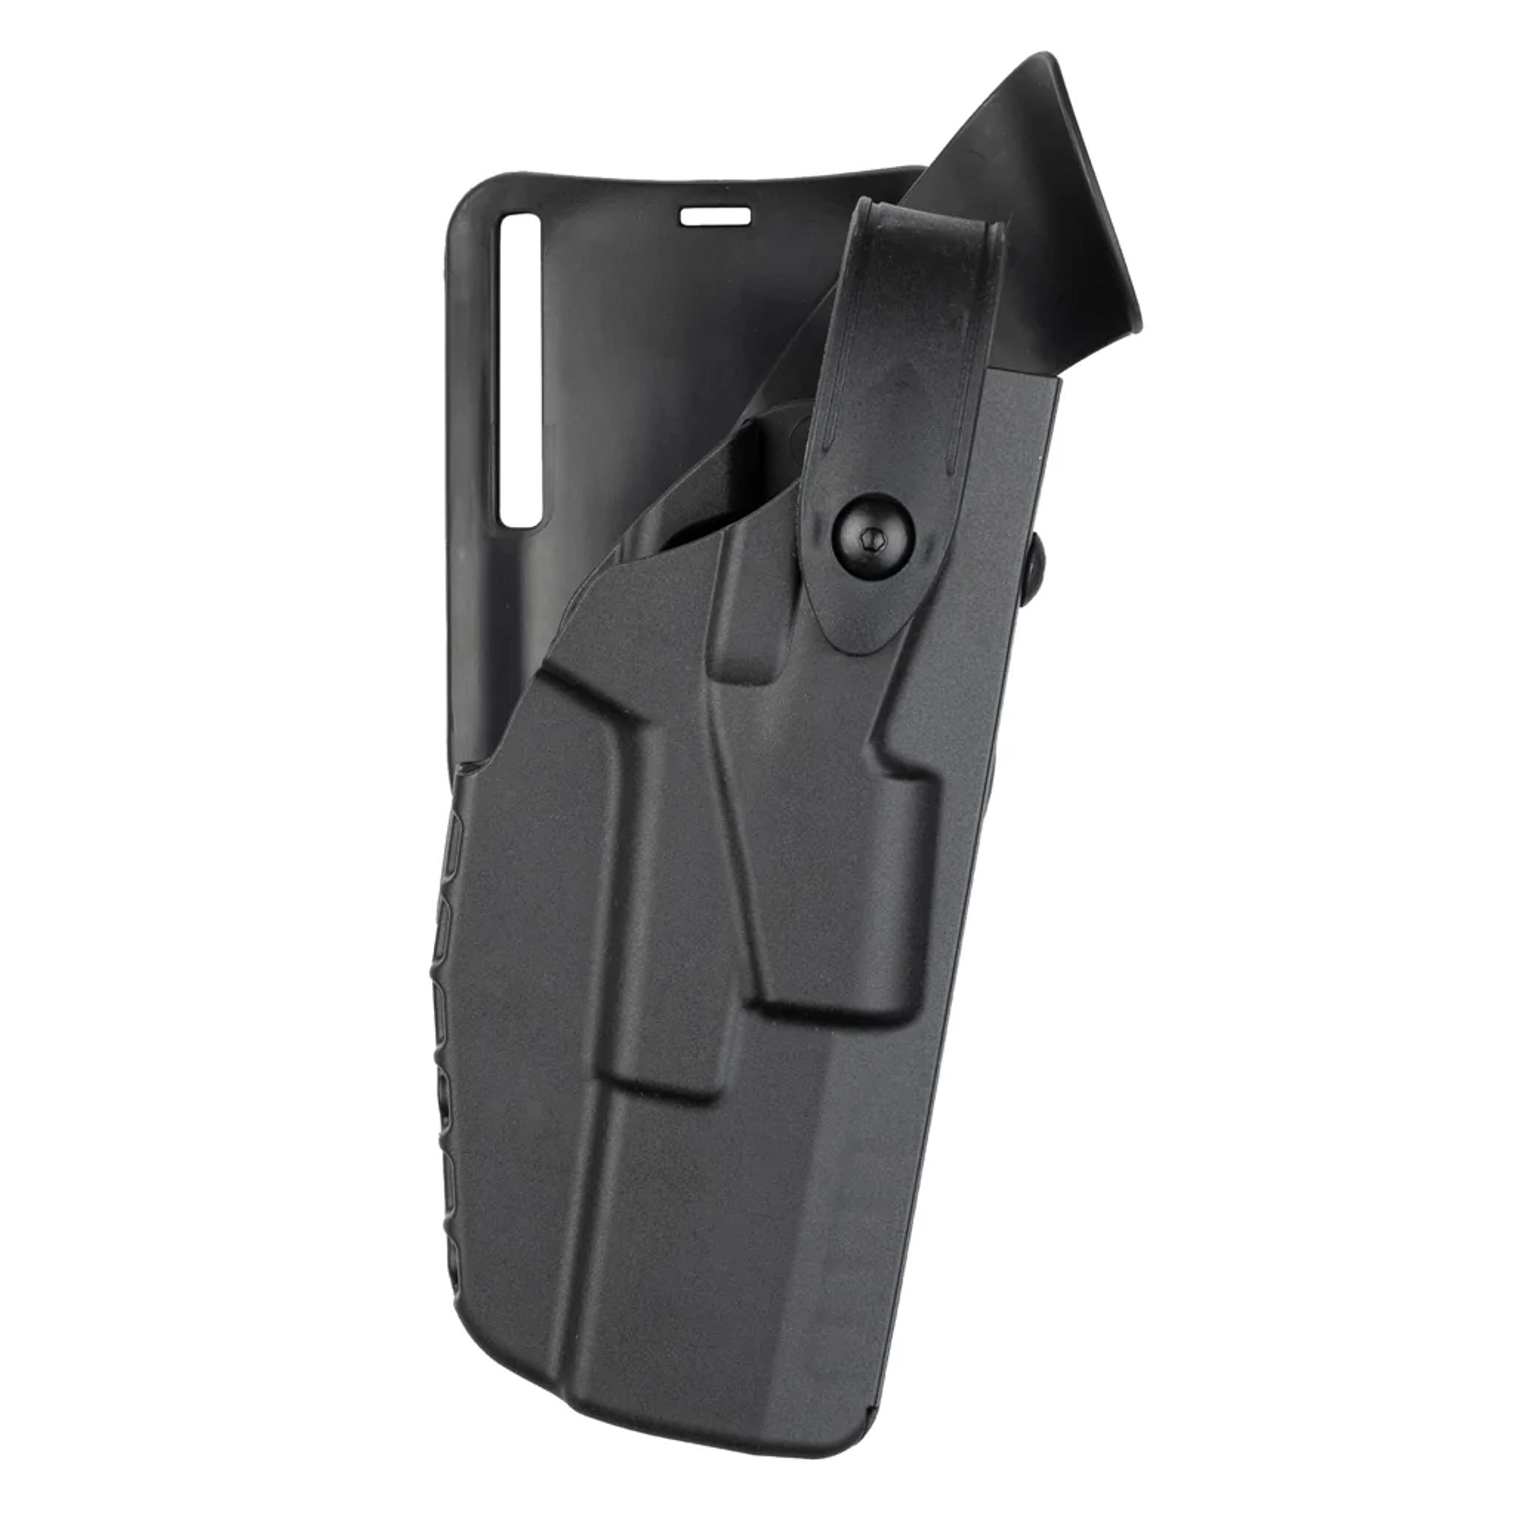 Model 7365 7ts Als/sls Low-ride, Level Iii Retention Duty Holster For Smith & Wesson M&p 45